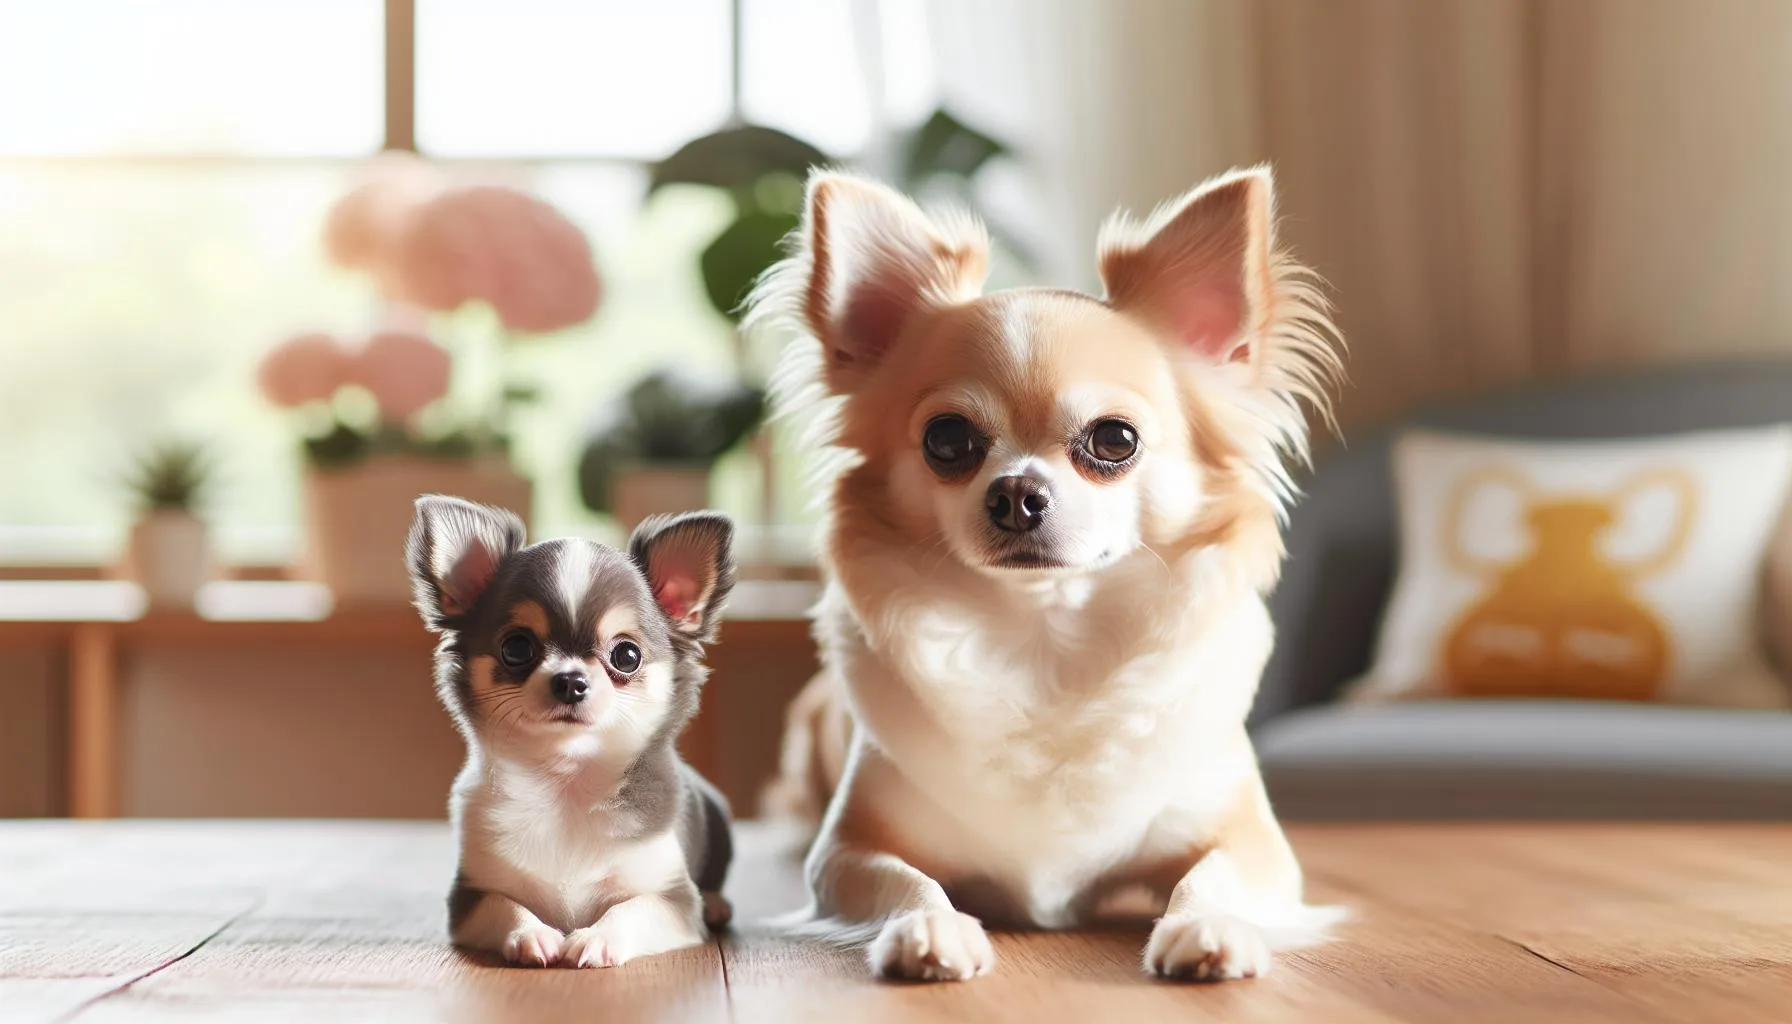 How Big is a Teacup Chihuahua? Find Out!